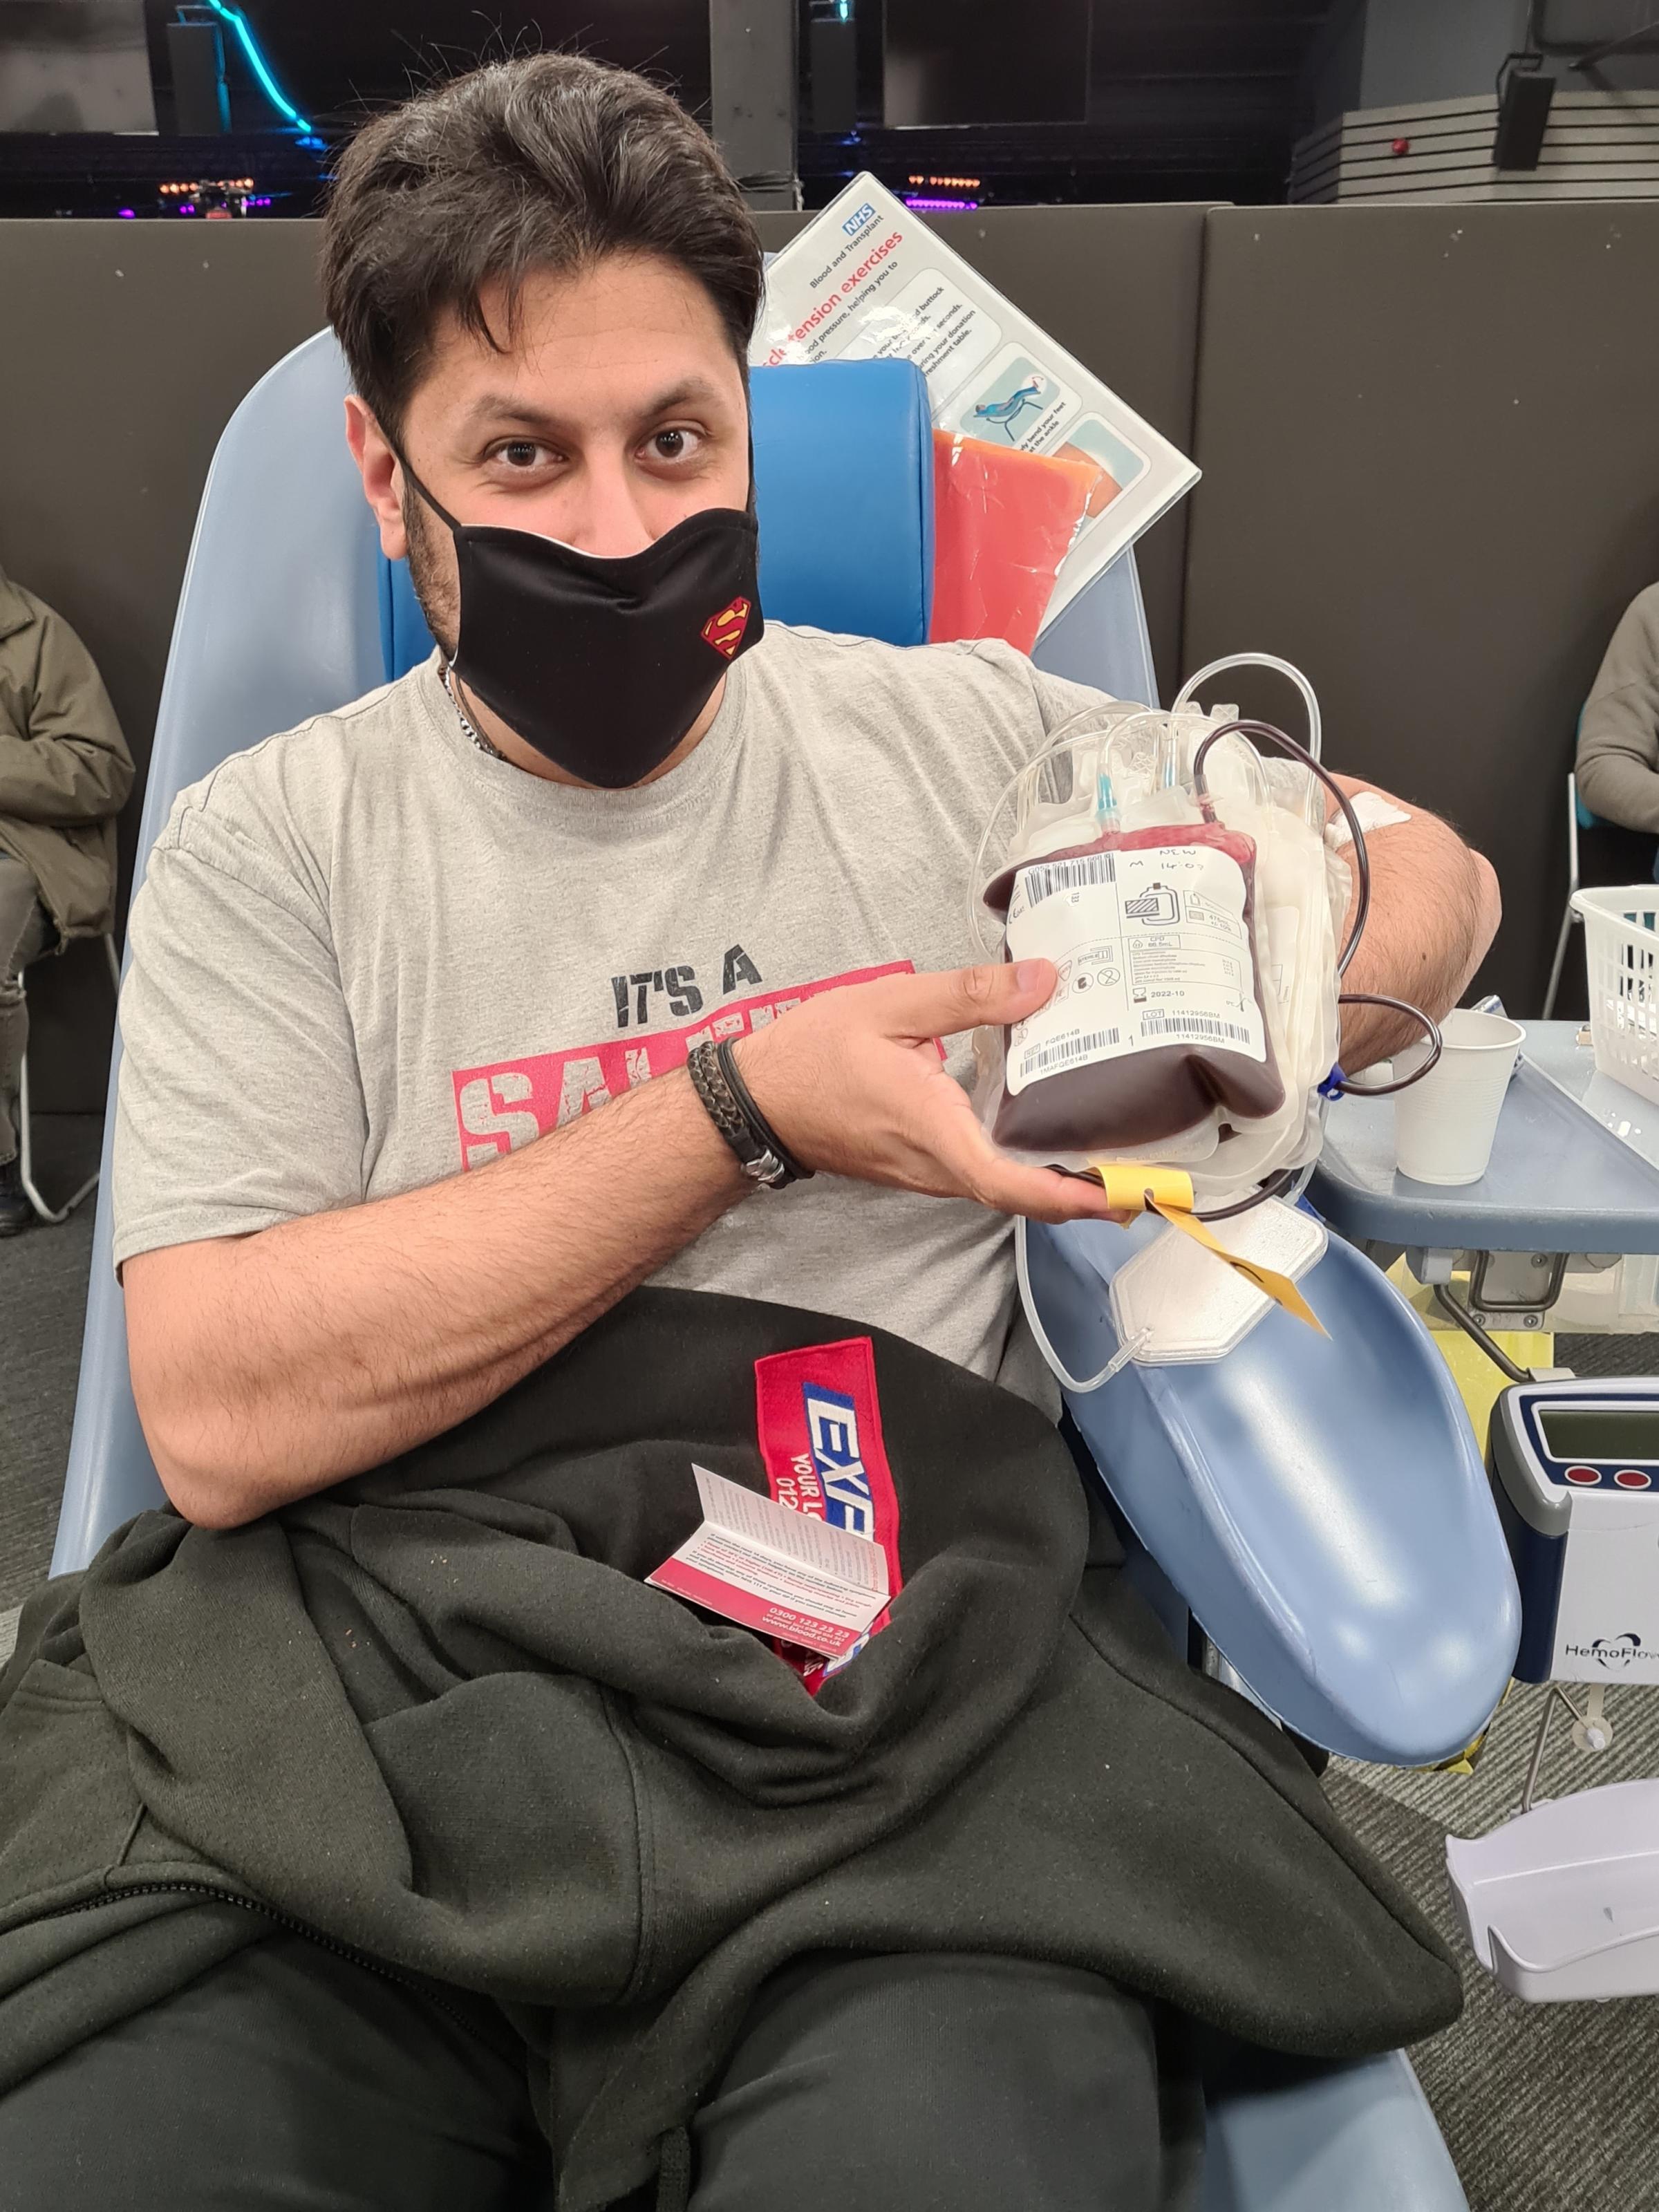 Shaz Saleem at his first blood donation session